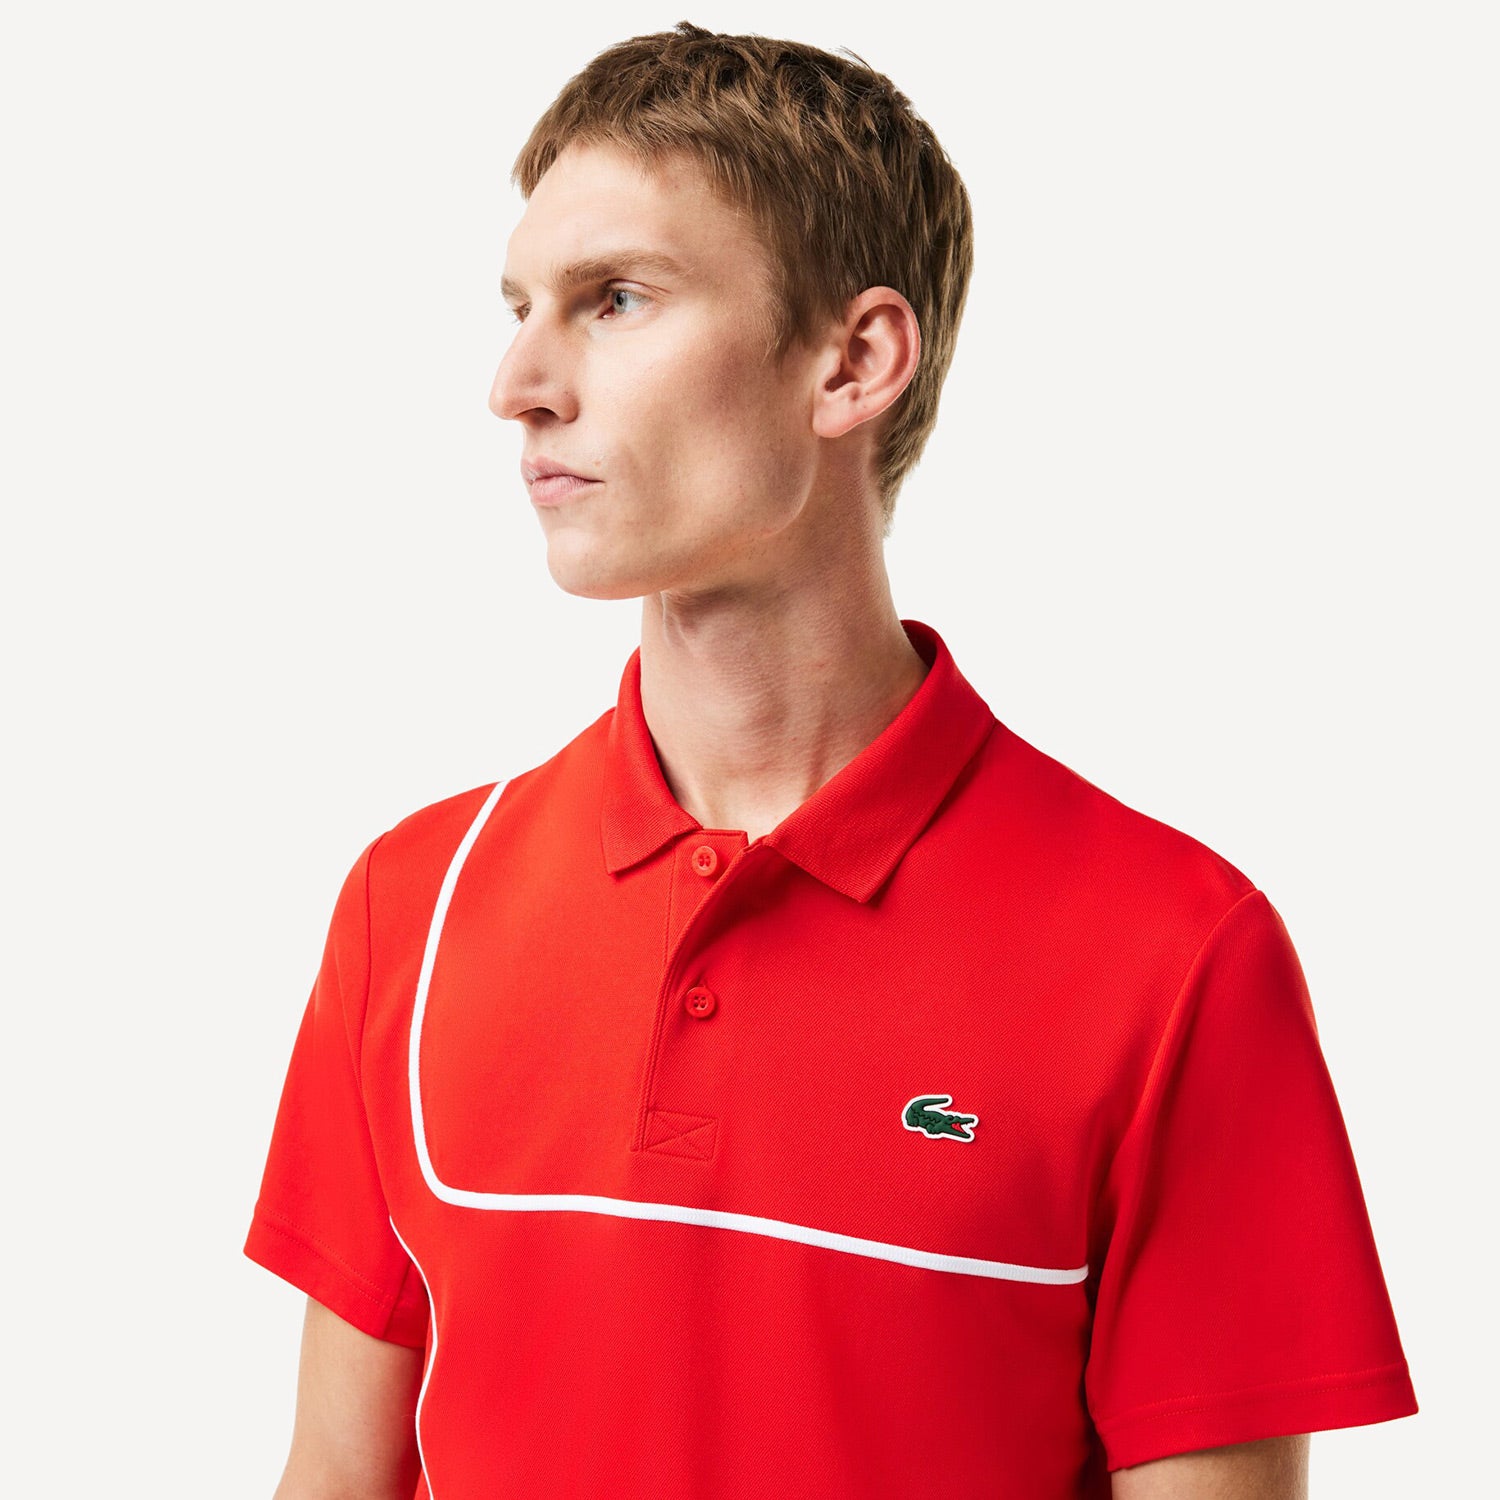 Lacoste Men's Ultra Dry Tennis Polo - Red (3)